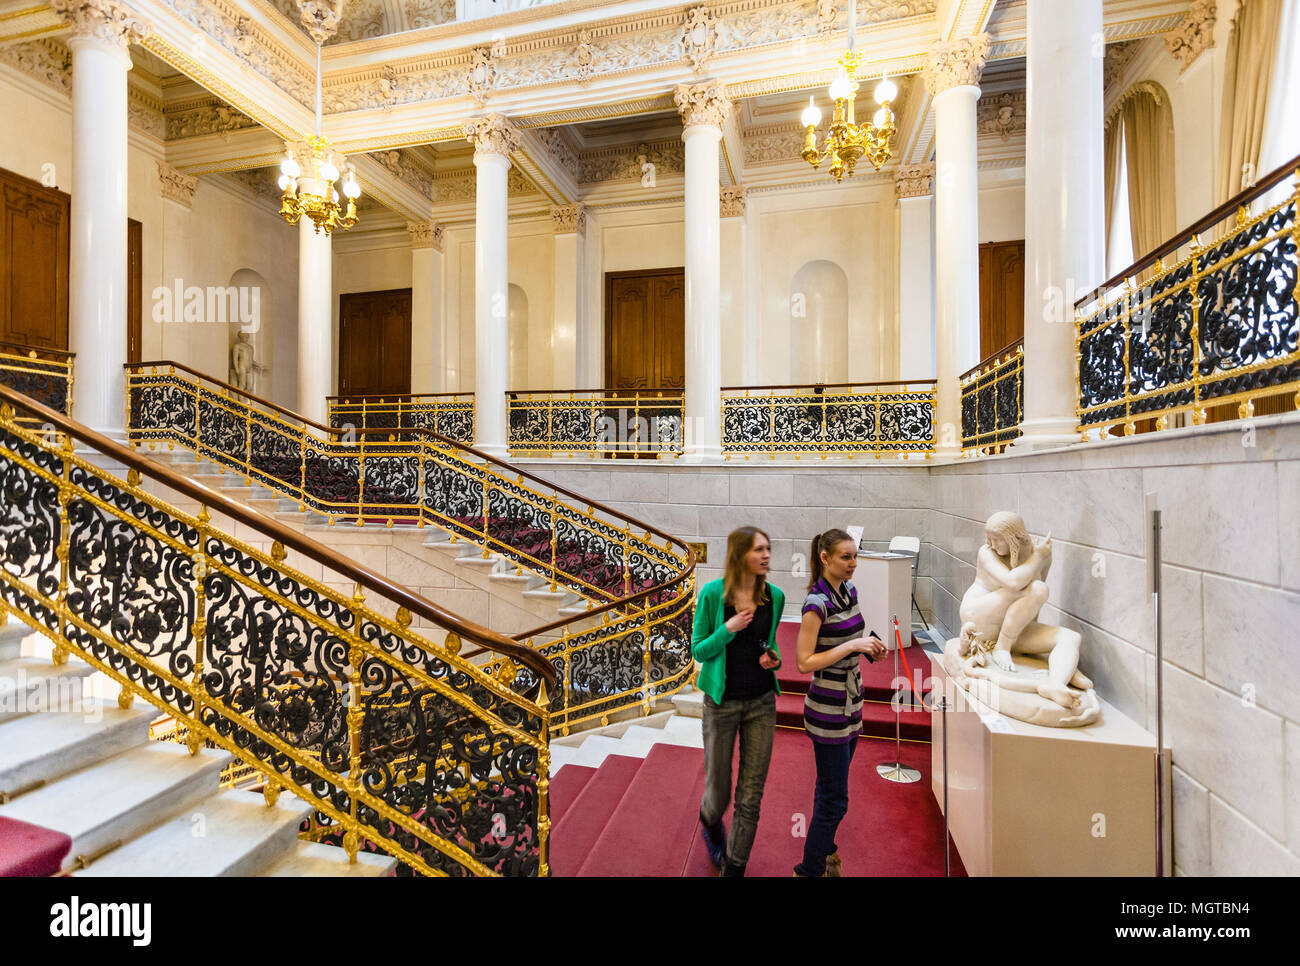 SAINT PETERSBURG, RUSSIA - MARCH 19, 2018: visitors on staircase in Faberge Museum in Shuvalov Palace in Saint Petersburg city. The Palace has housed  Stock Photo